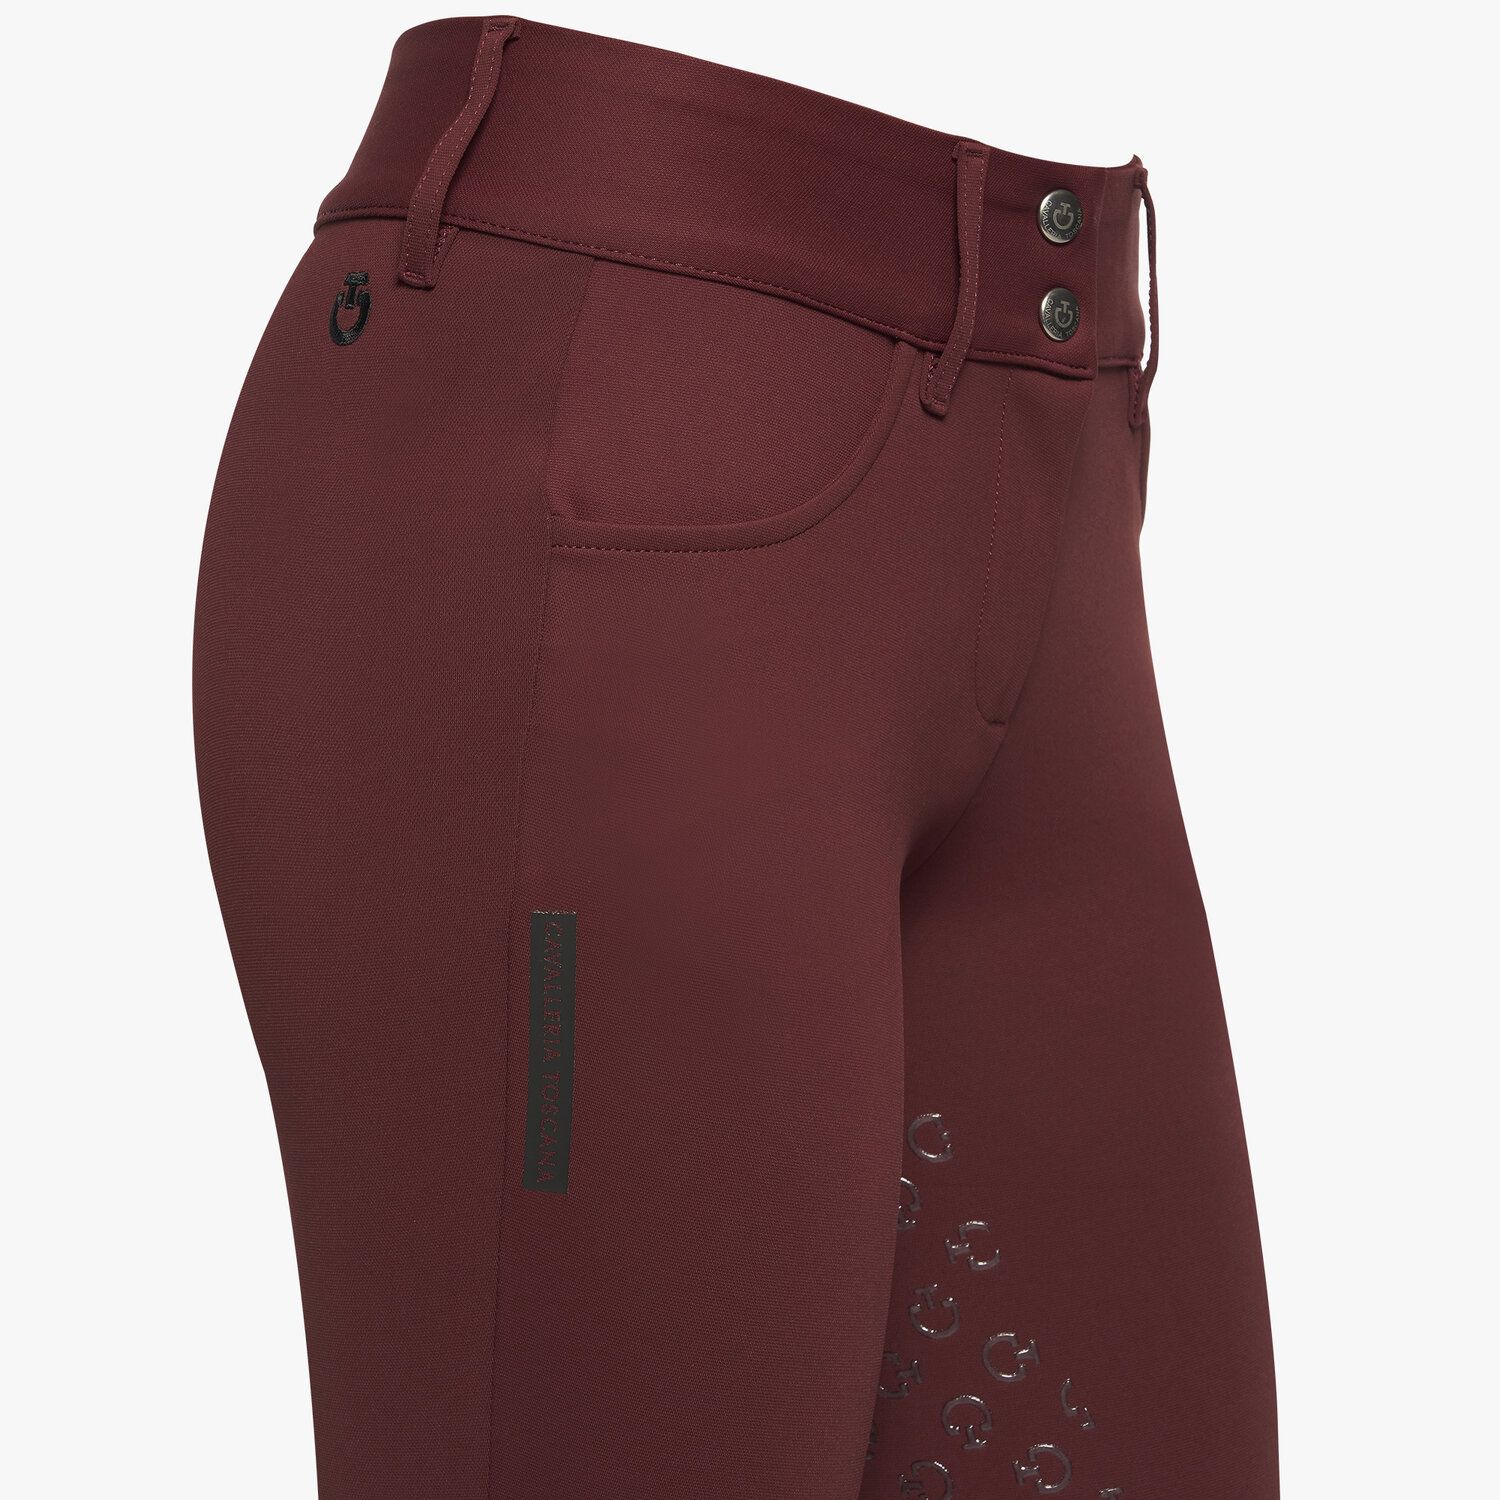 Cavalleria Toscana Women's dressage breeches with perforated logo tape BORDEAUX-4